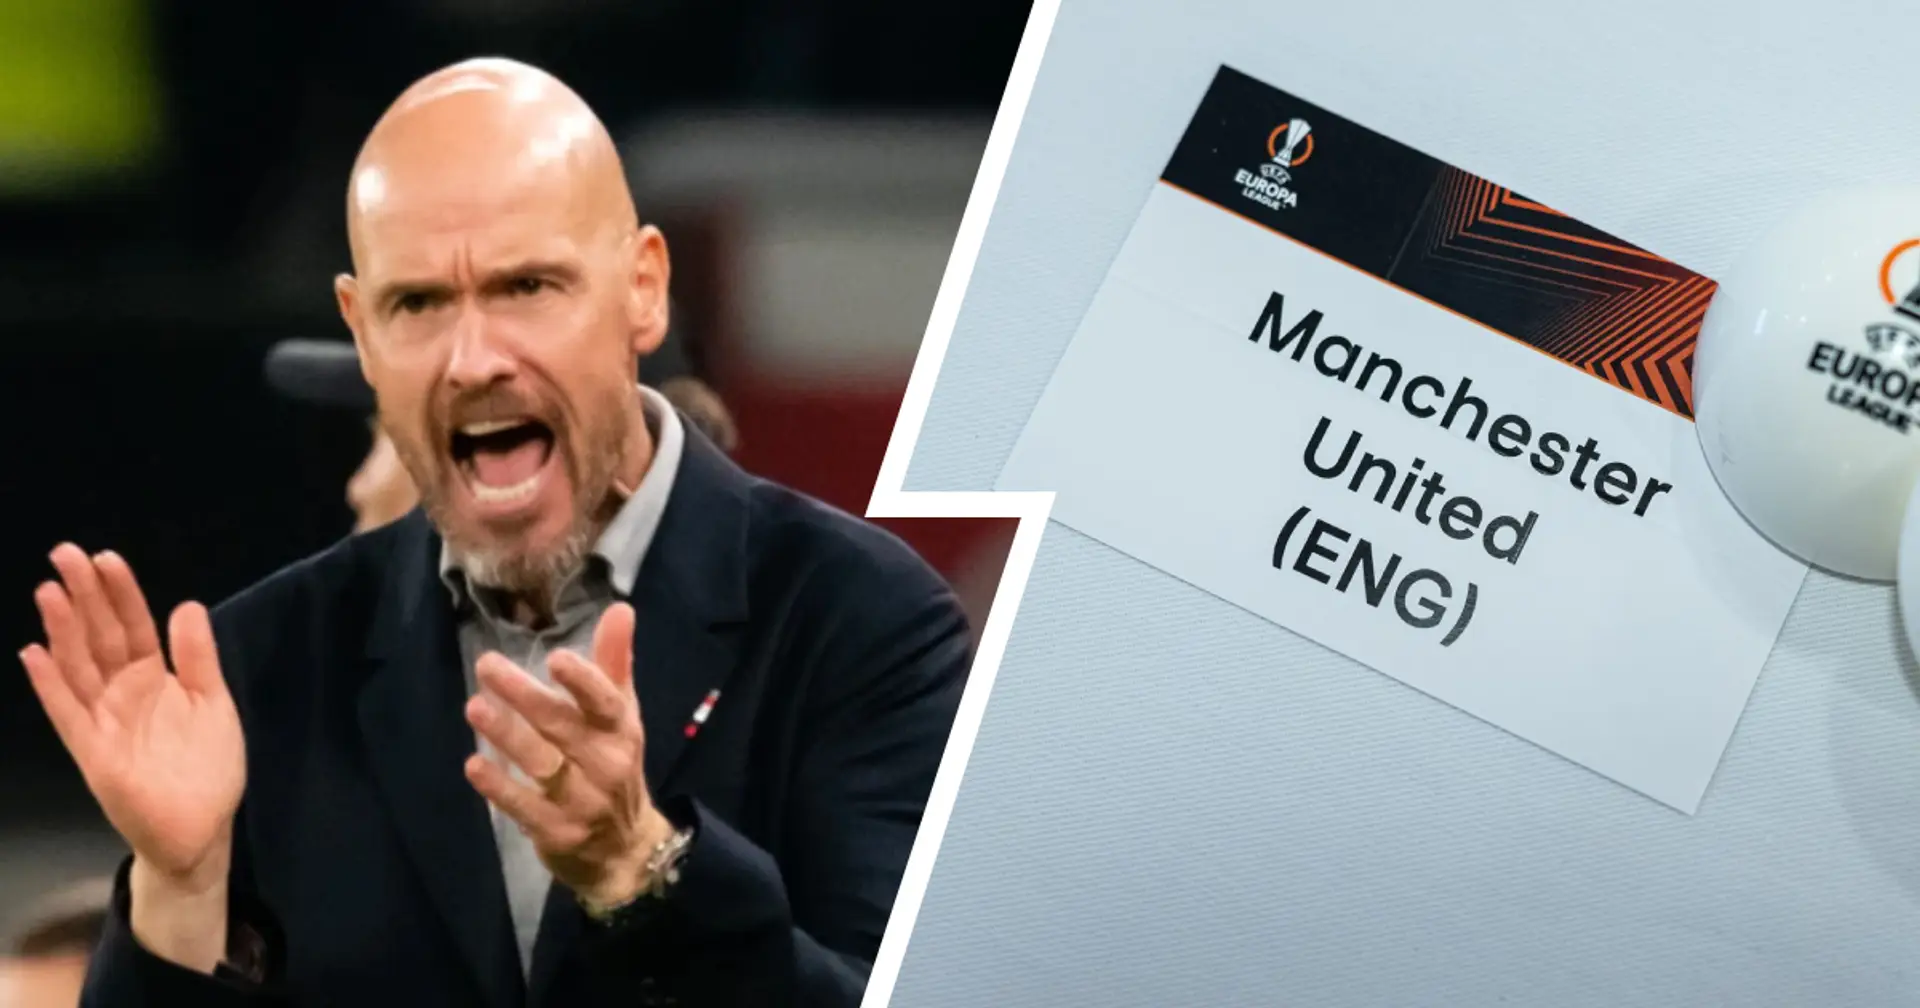 'We should be able to rotate the team quite a lot': Man United fans react to Europa League draw